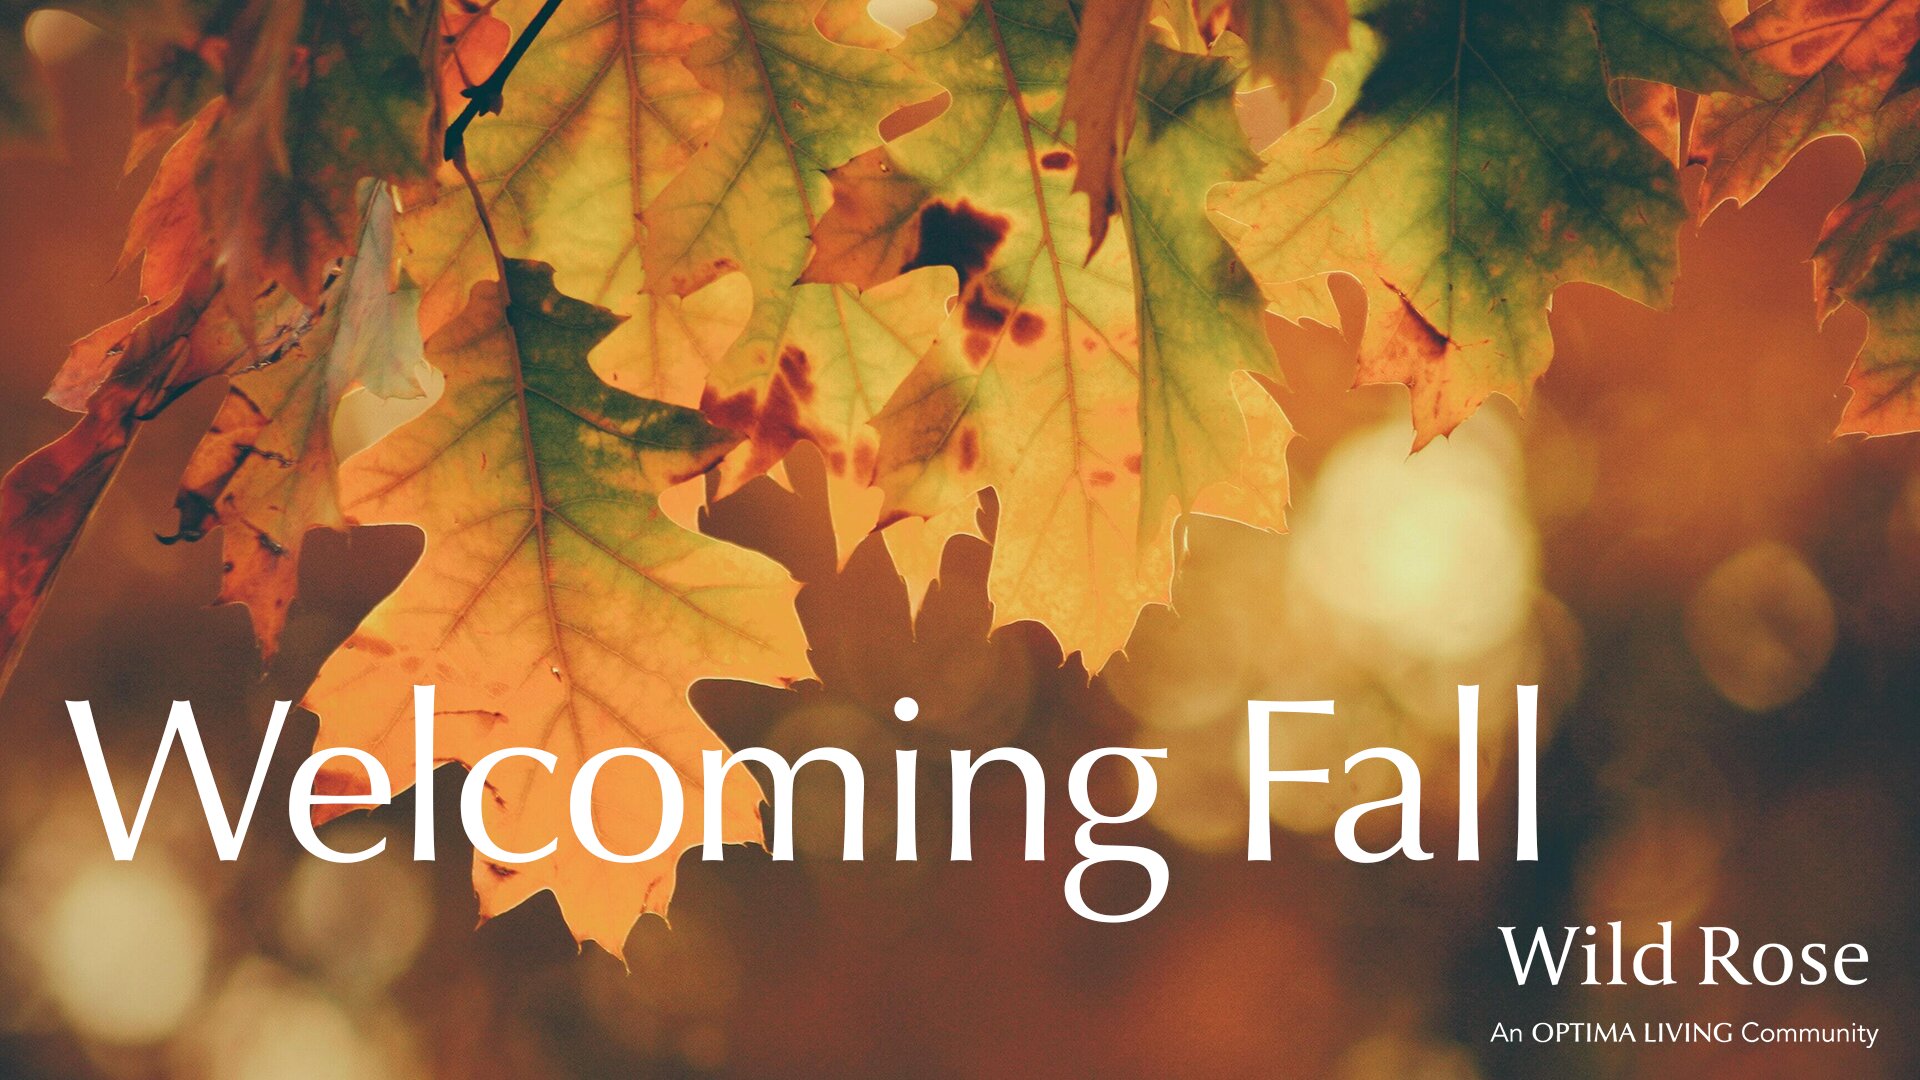 Welcome to fall at Wild Rose senior living